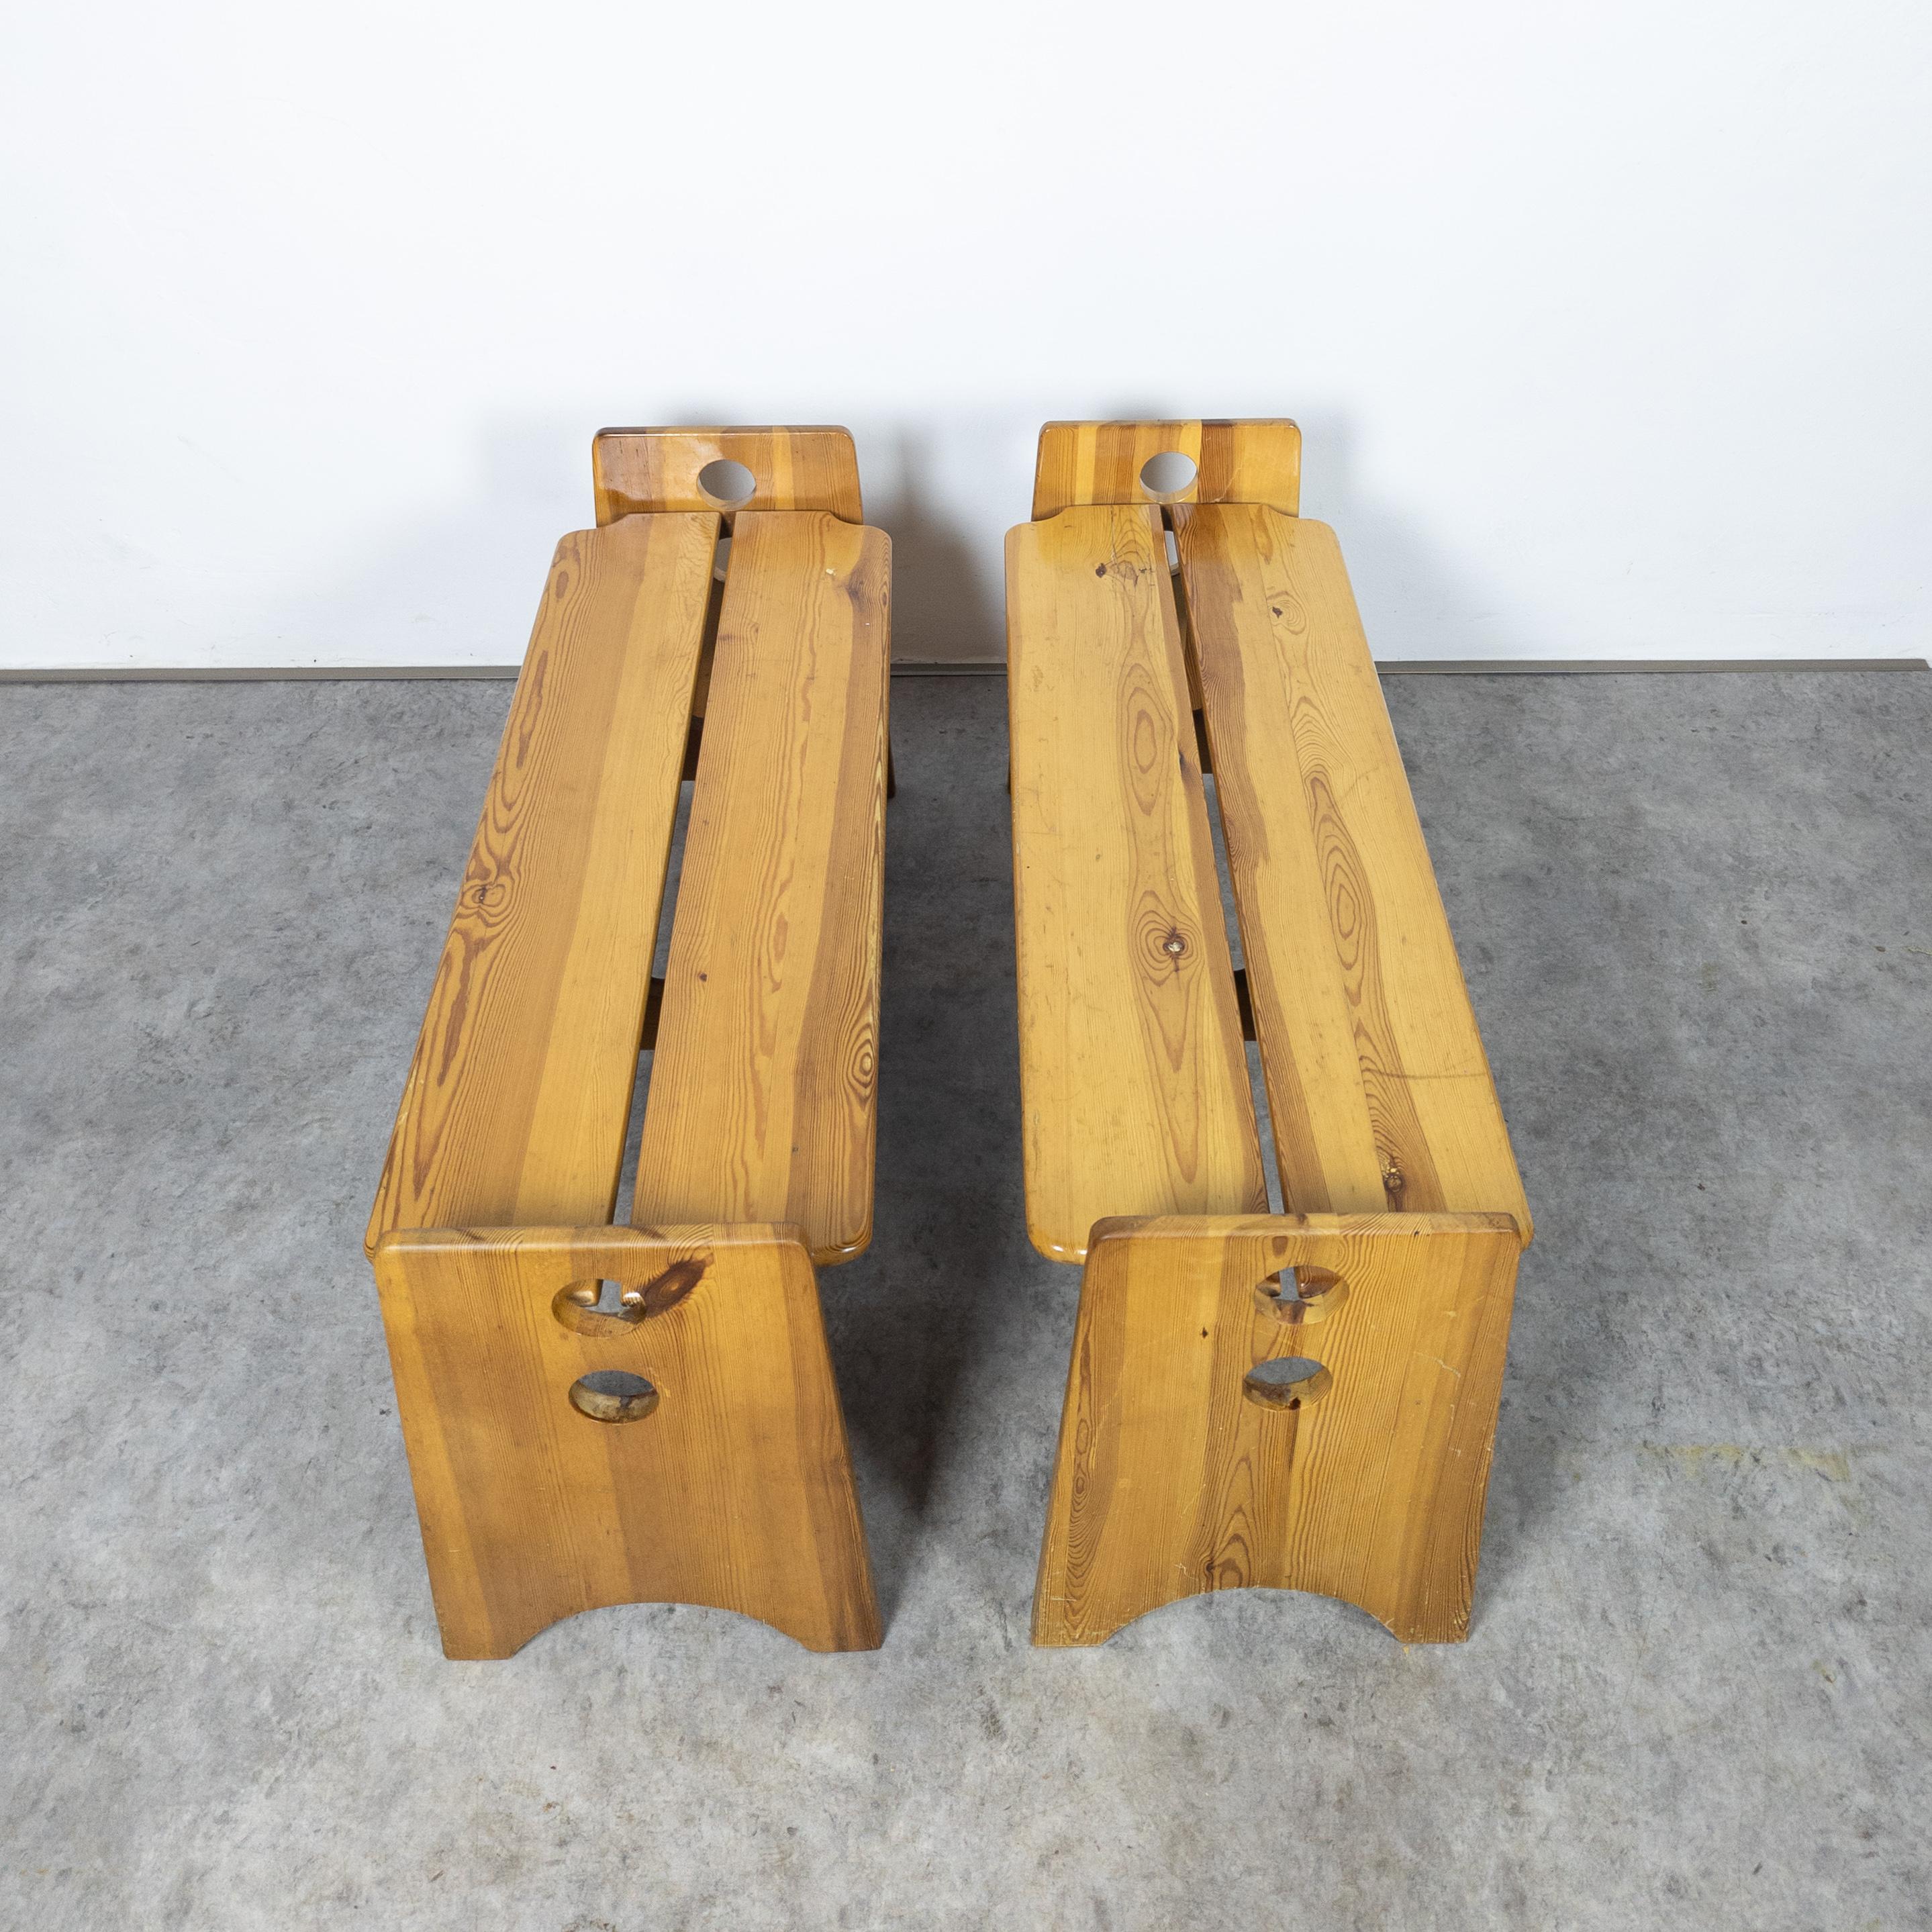 Sculptural Dining Set in Pine by Gilbert Marklund for Furusnickarn AB, 1970s For Sale 4